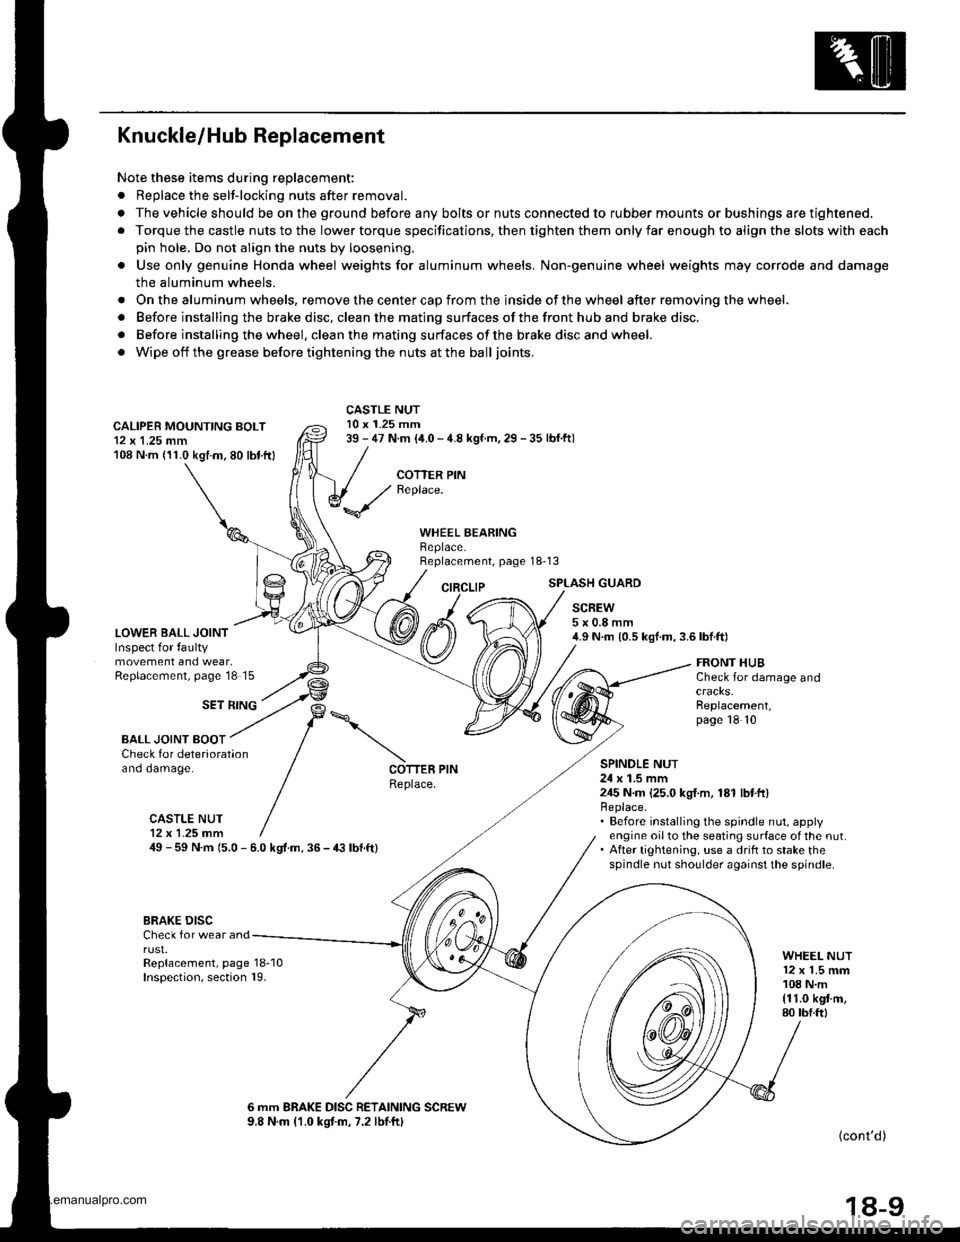 HONDA CR-V 1997 RD1-RD3 / 1.G Workshop Manual 
Knuckle/Hub Replacement
Note these items during replacement:
. Replace the selt-locking nuts after removal.
. The vehicle should be on the ground before any bolts or nuts connected to rubber mounts o